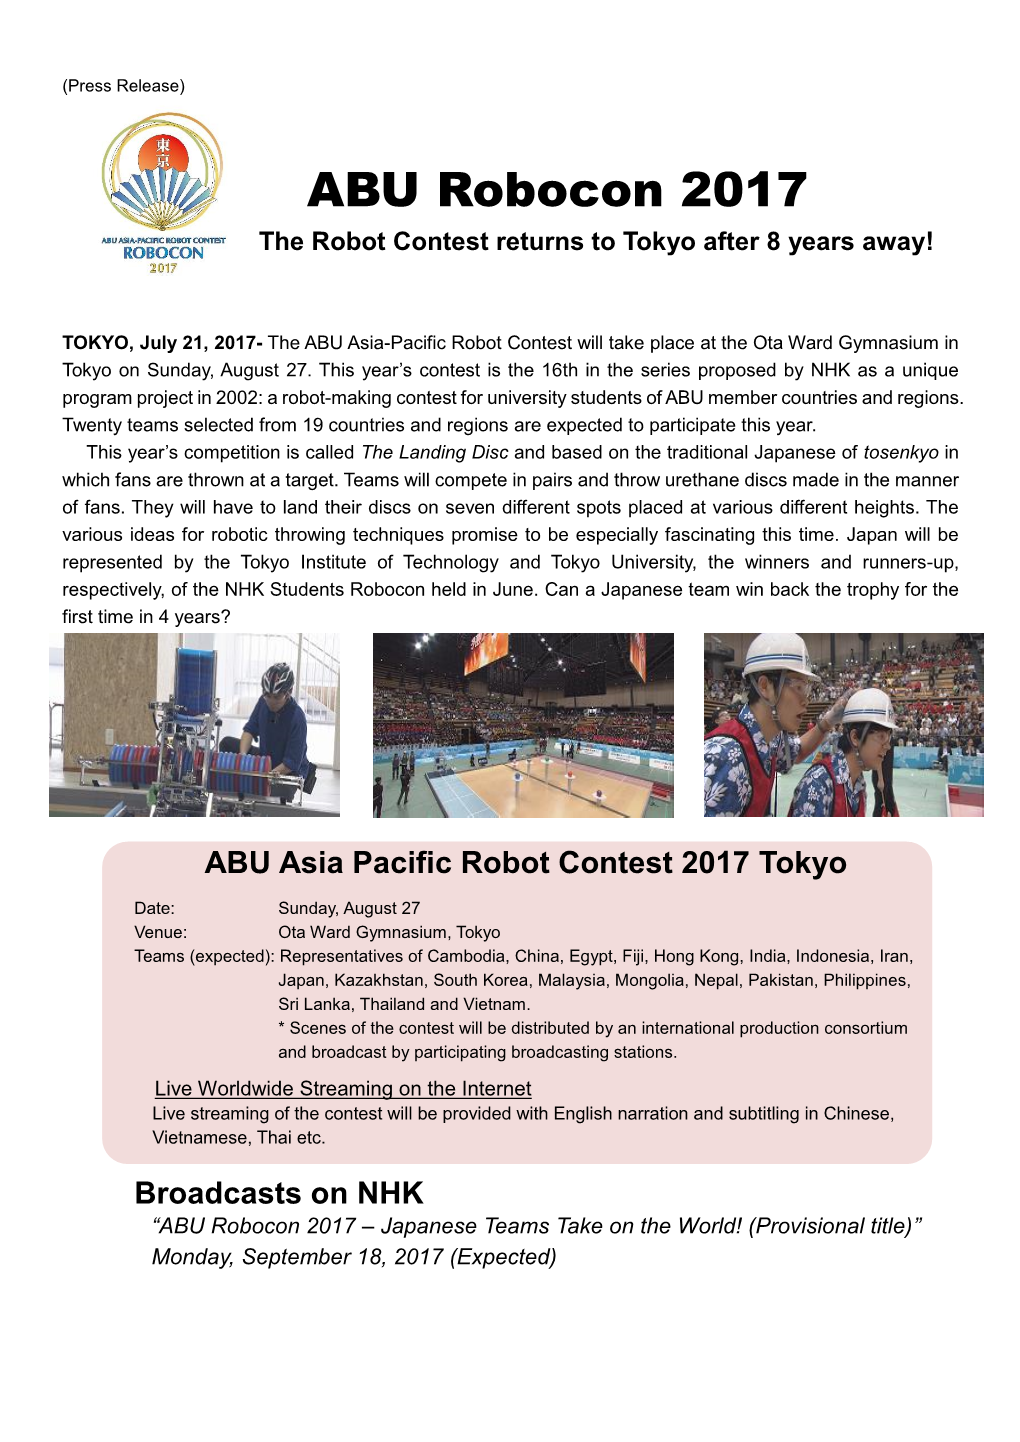 ABU Robocon 2017 the Robot Contest Returns to Tokyo After 8 Years Away!